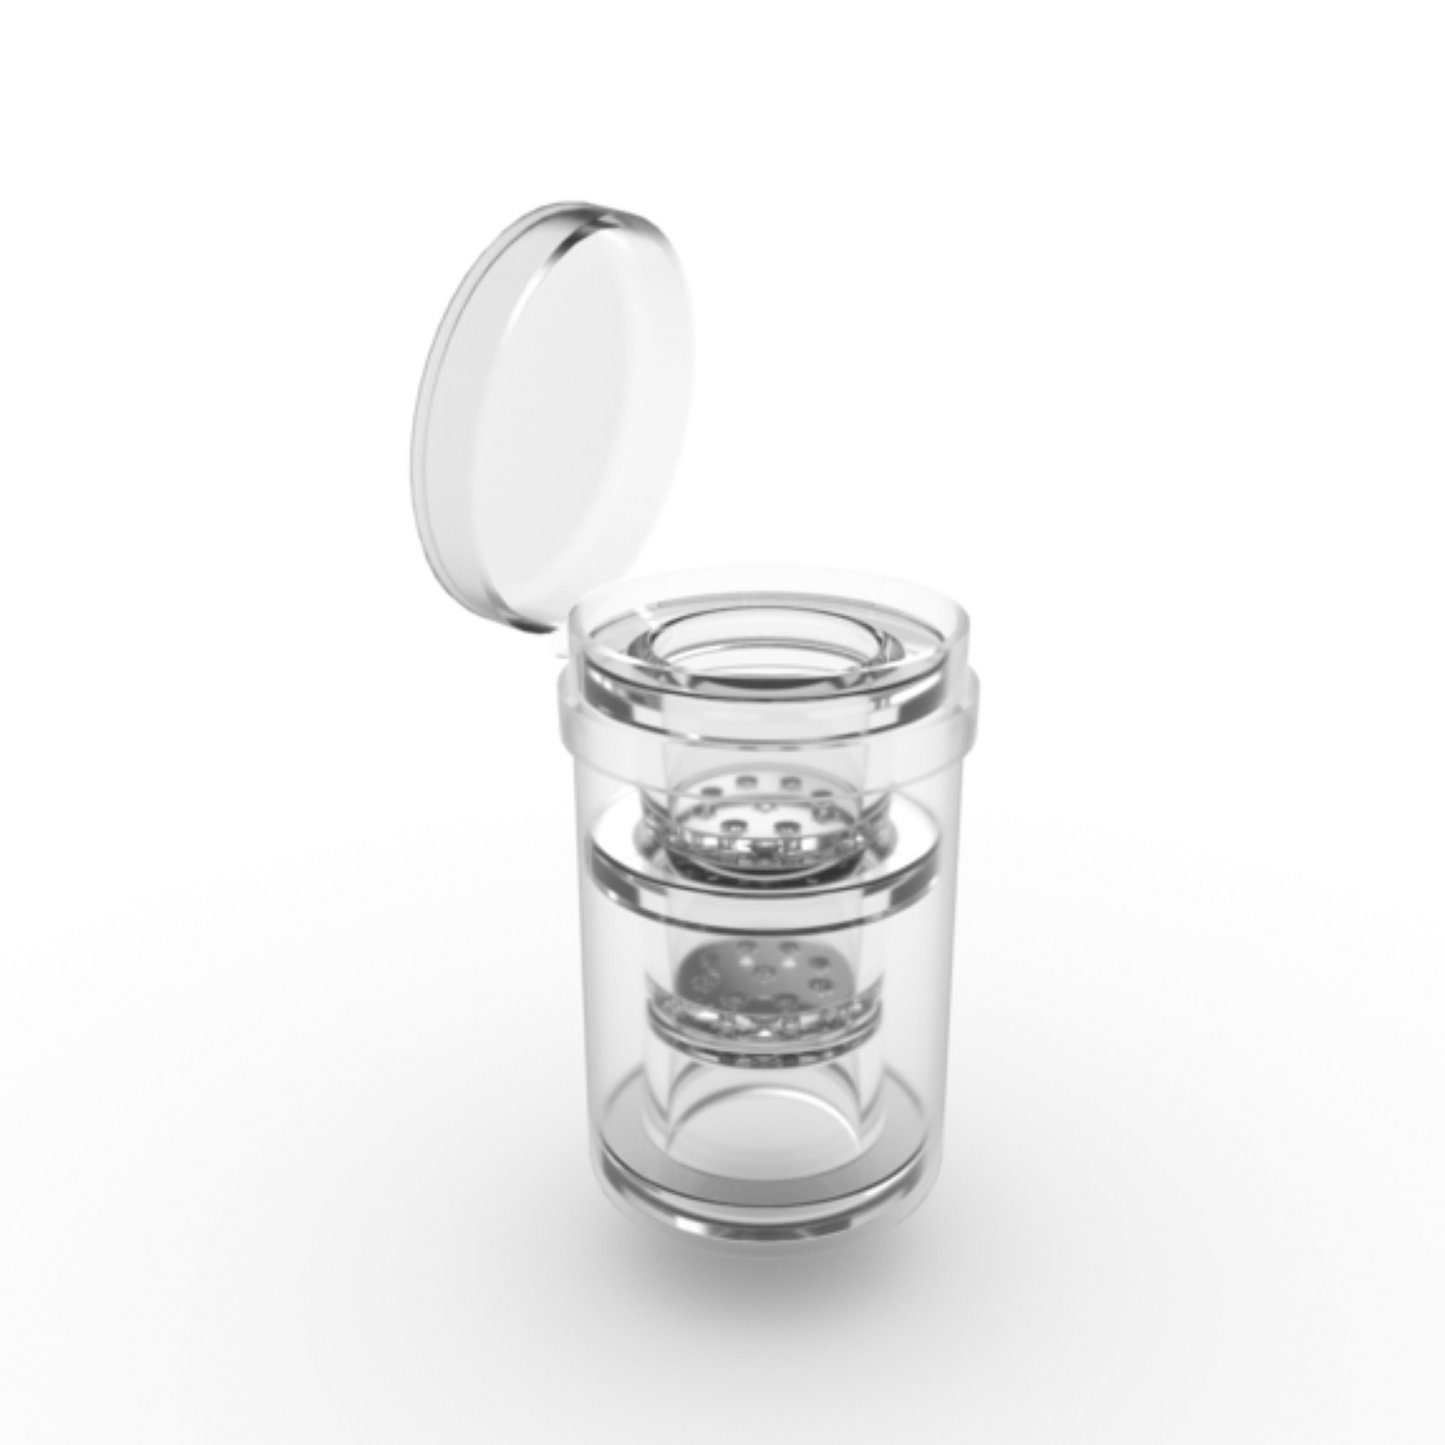 Weedgets Maze-X Replacement Glass Bowls (3-Pack) by Weedgets | Mission Dispensary